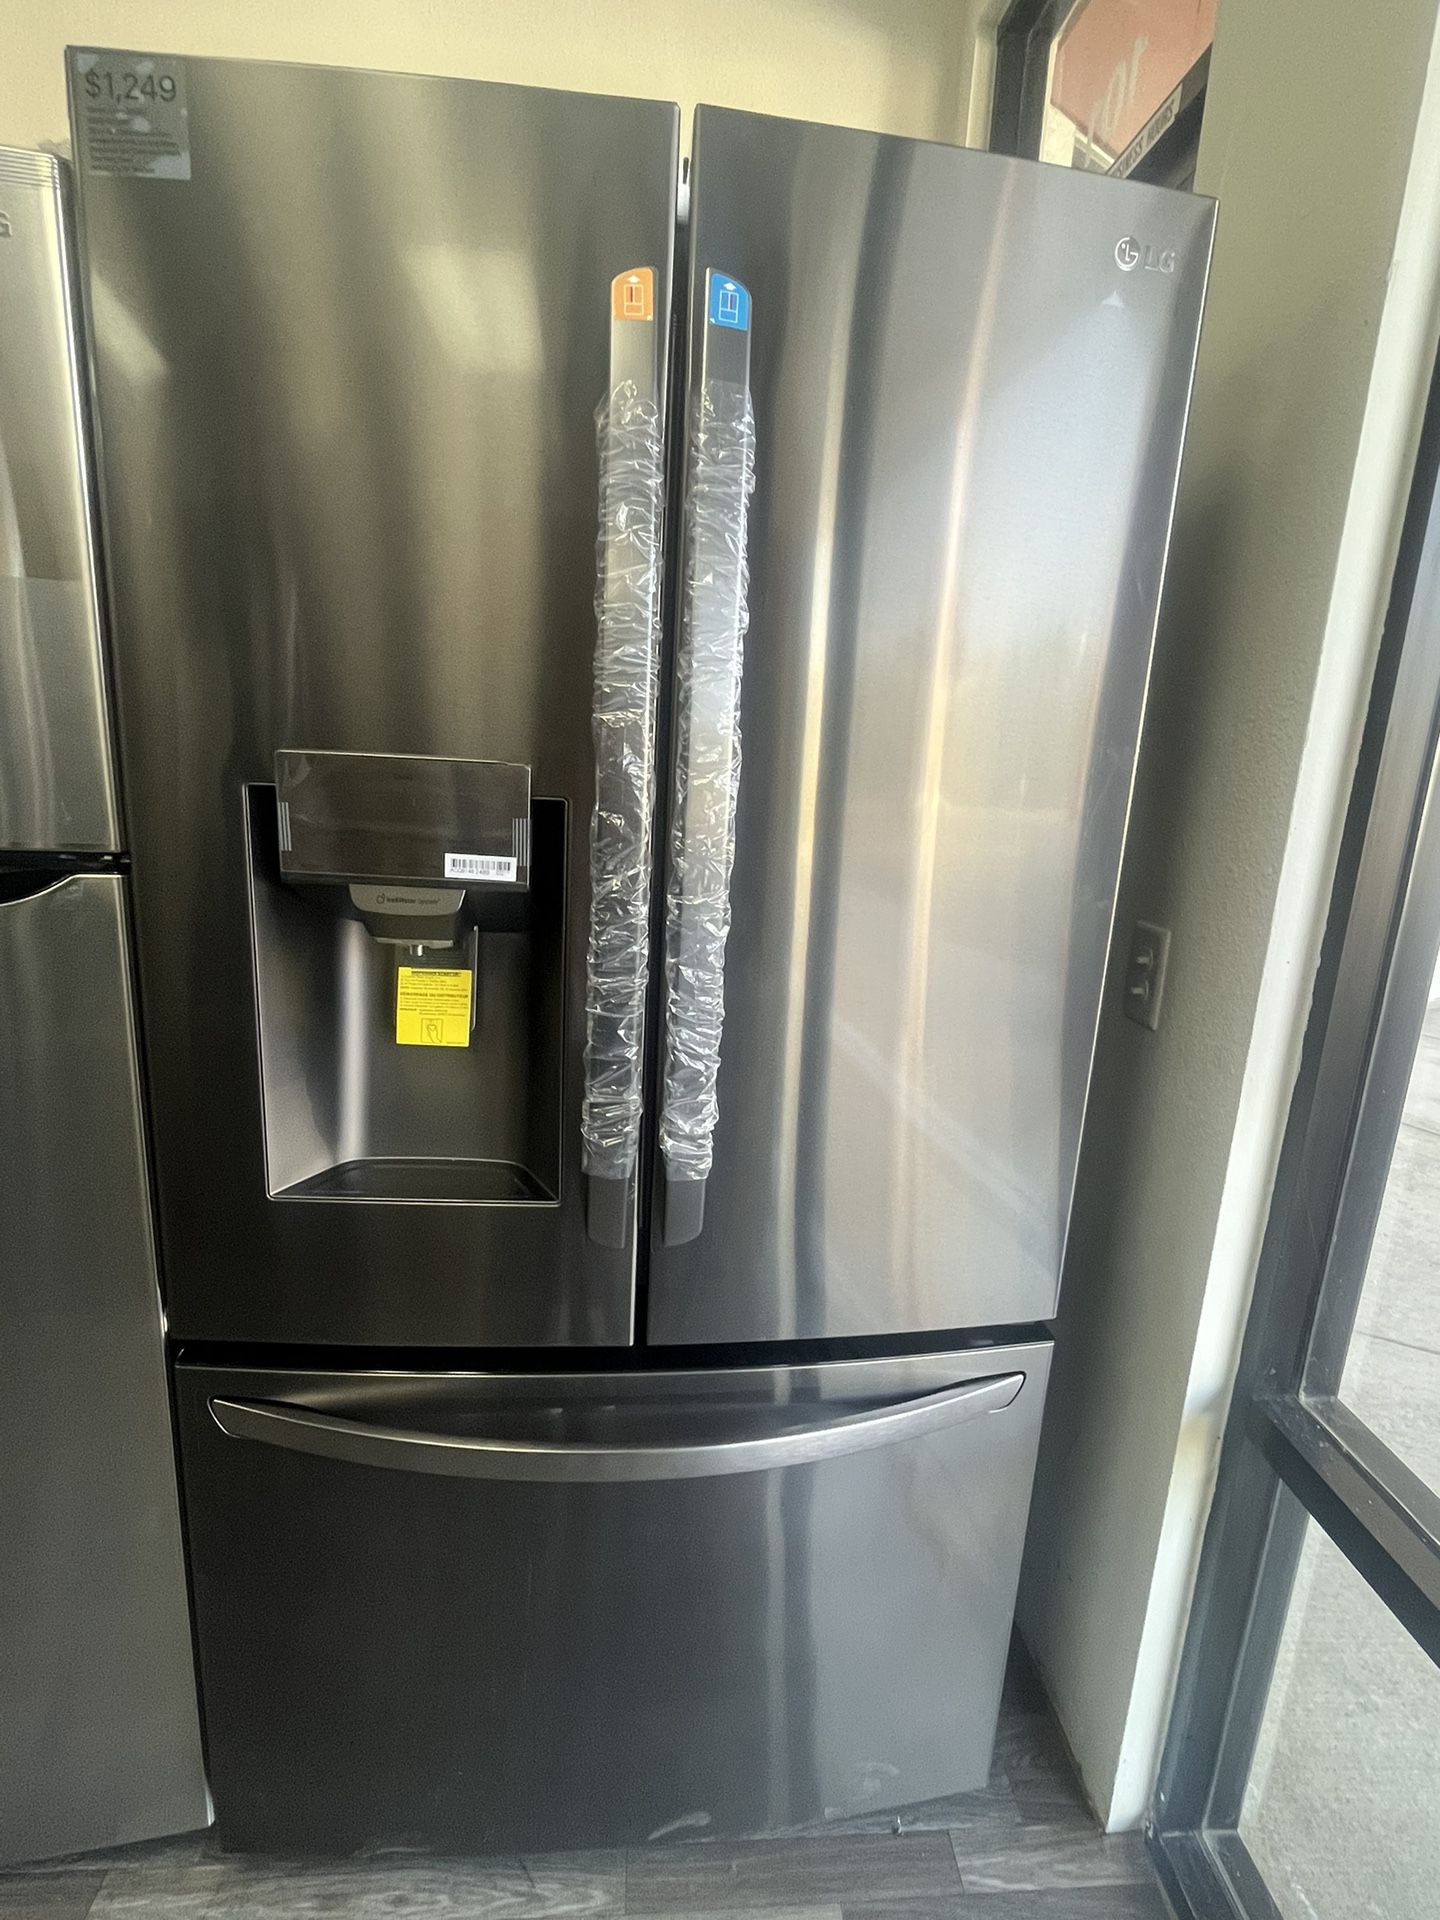 Memorial Day Sales/ Black Stainless Steel Refrigerator With Water / Ice Dispenser Now$1249